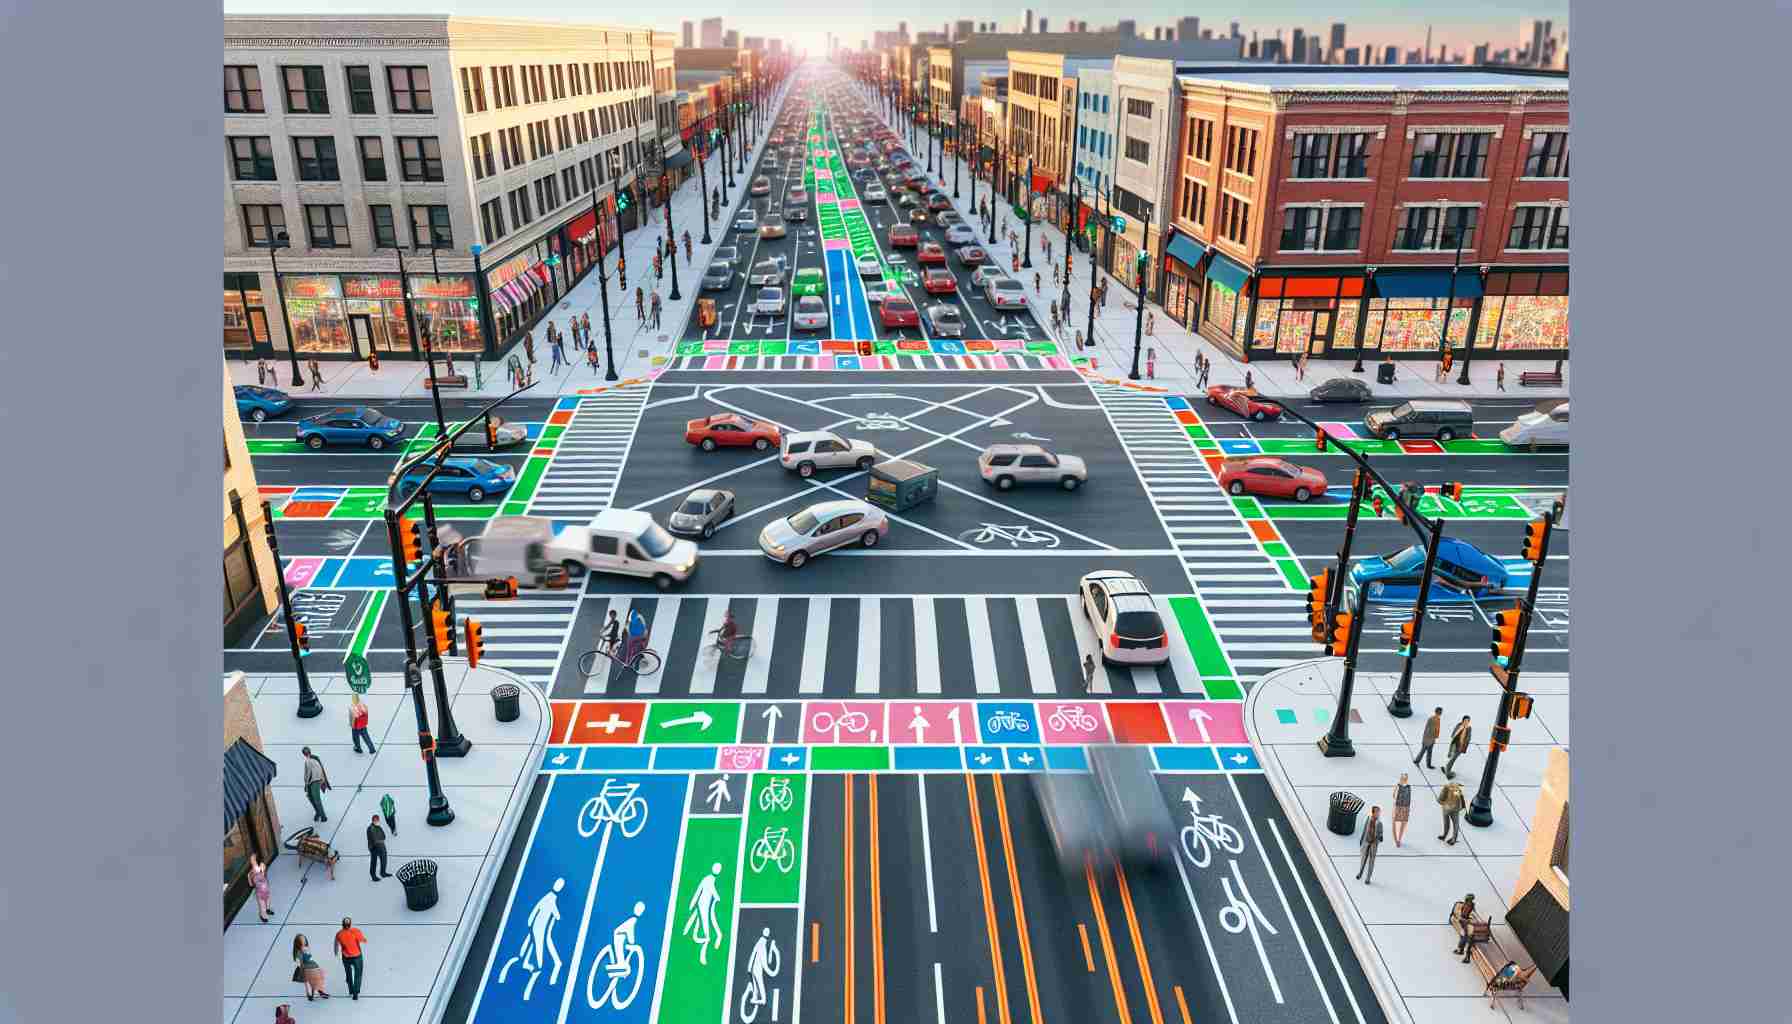 Generate a realistic and detailed, high-definition image of an intersection in a city named Marion. In the image, incorporate elements that denote improvements in traffic safety. These can include items such as pedestrian crosswalks with vibrant, clear markings, state-of-the-art traffic signals, visible signage for drivers and pedestrians, separate bike lanes, and appropriate street lighting. The intersection should appear busy, with vehicles, cyclists, and pedestrians co-existing in a visibly orderly and safe manner.